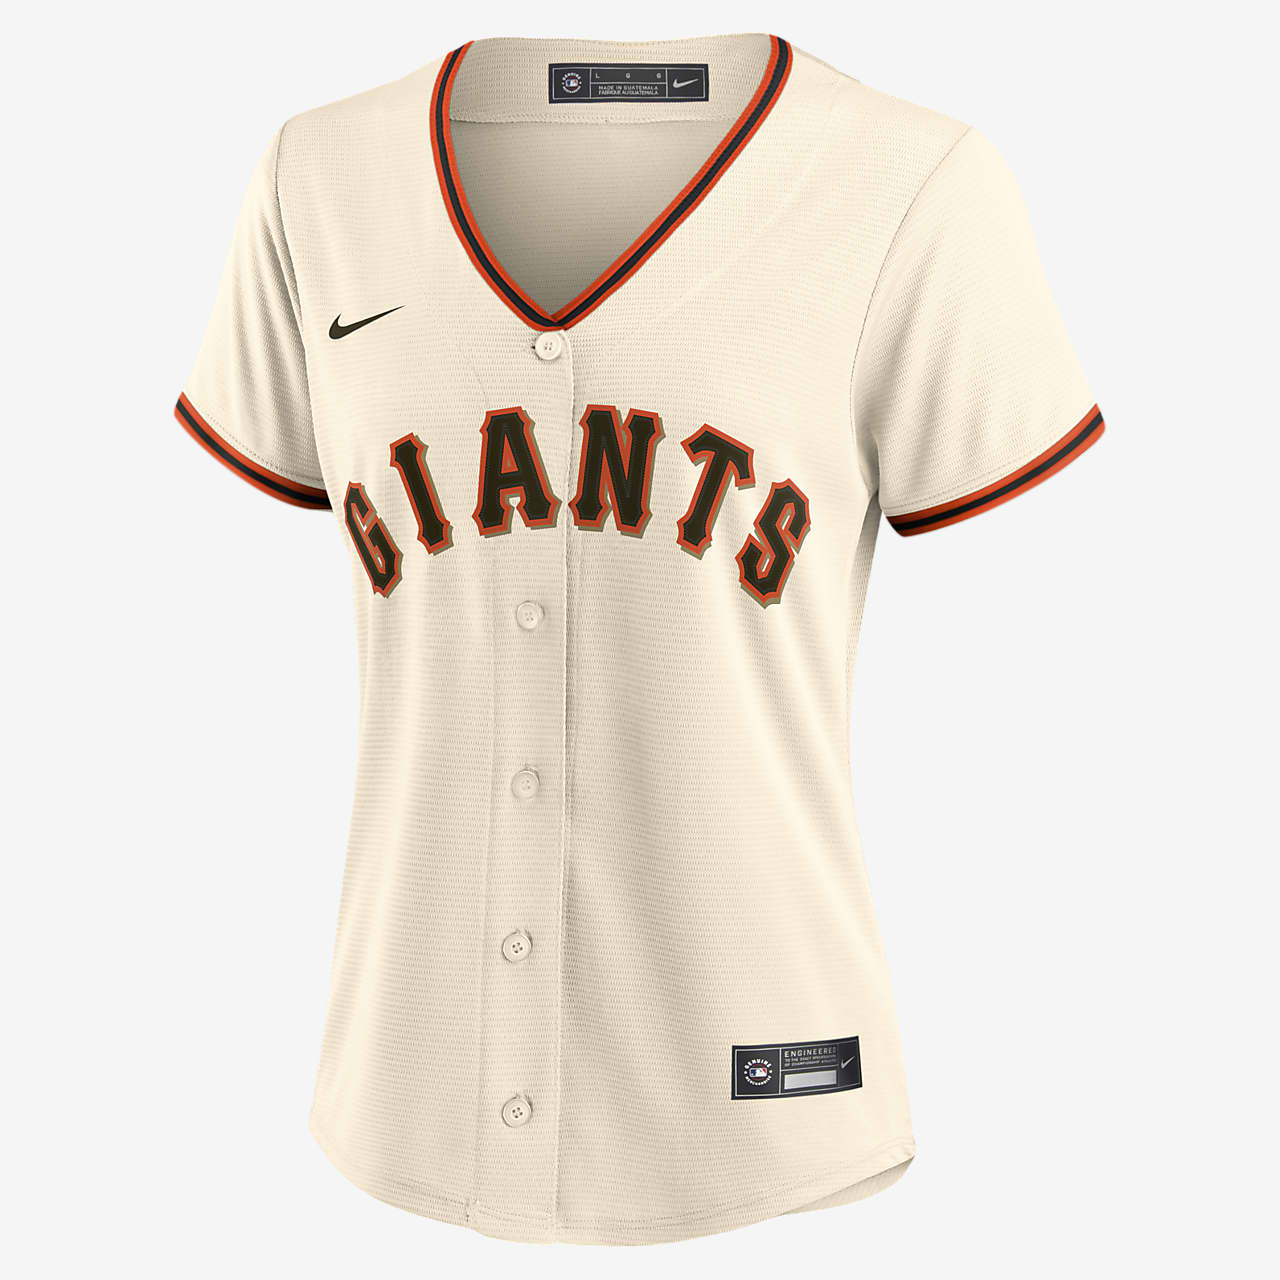 buster posey jersey for sale